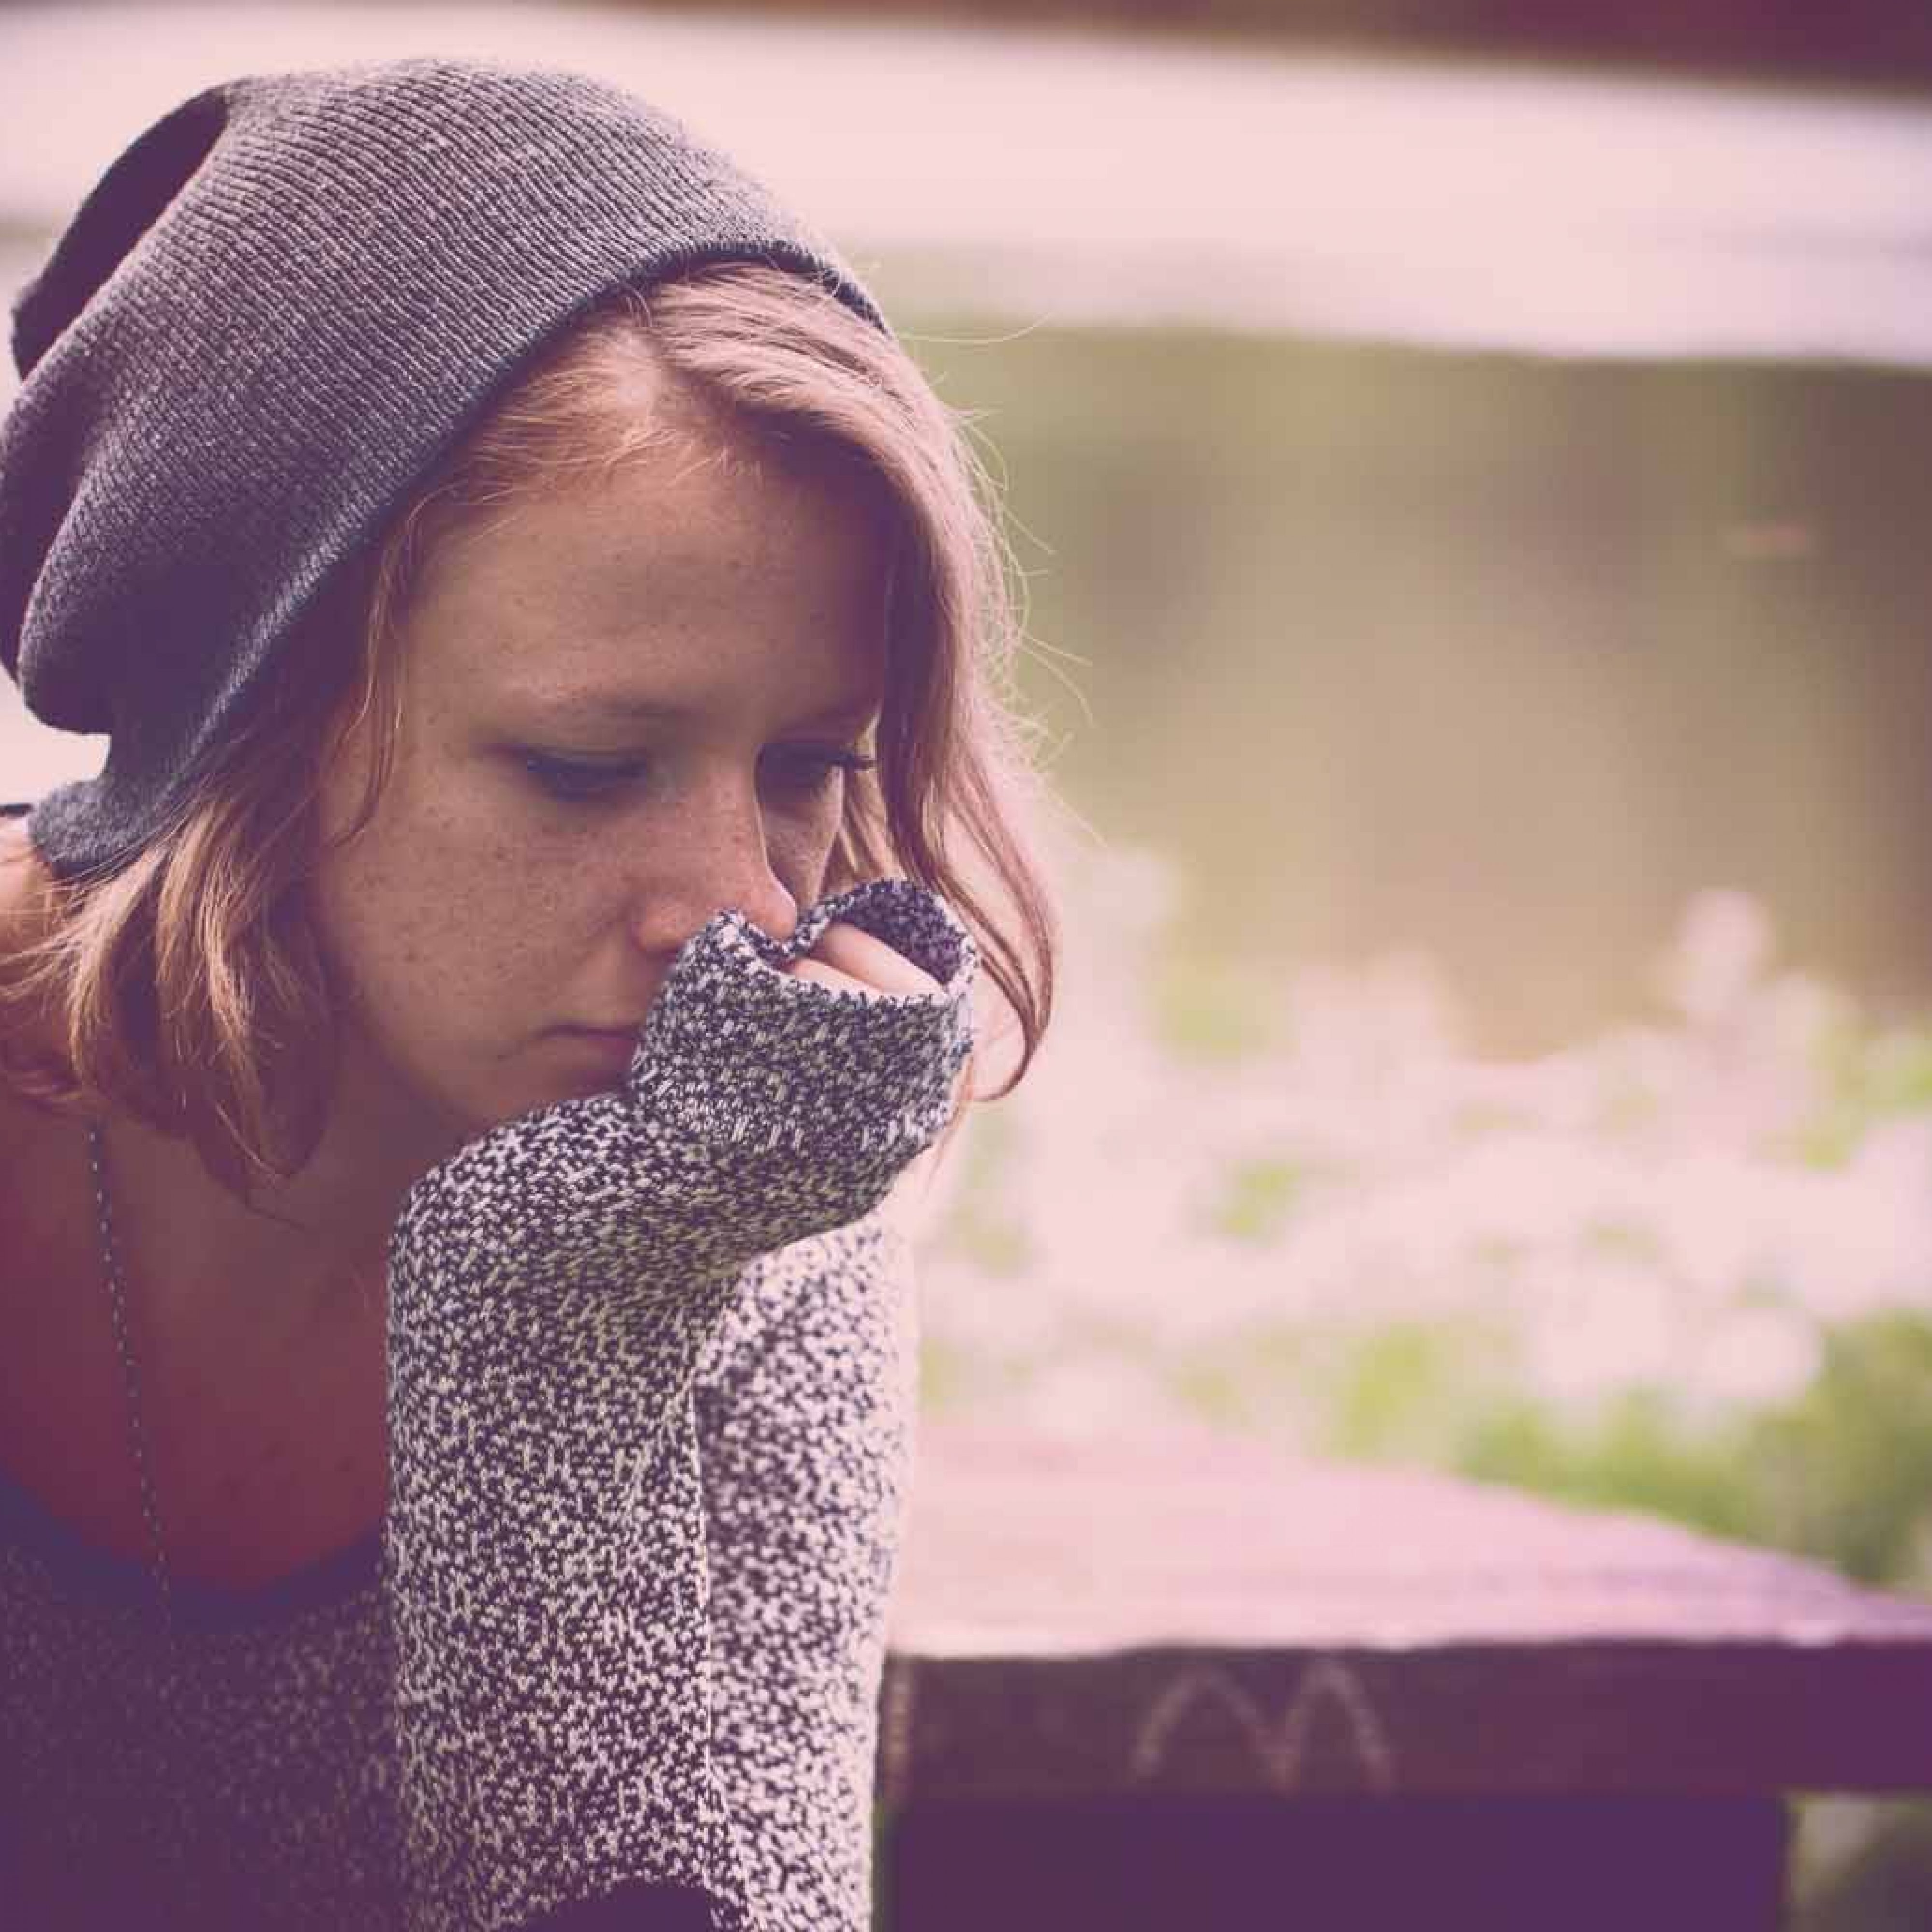 Is Battling Depression Disappointing God?